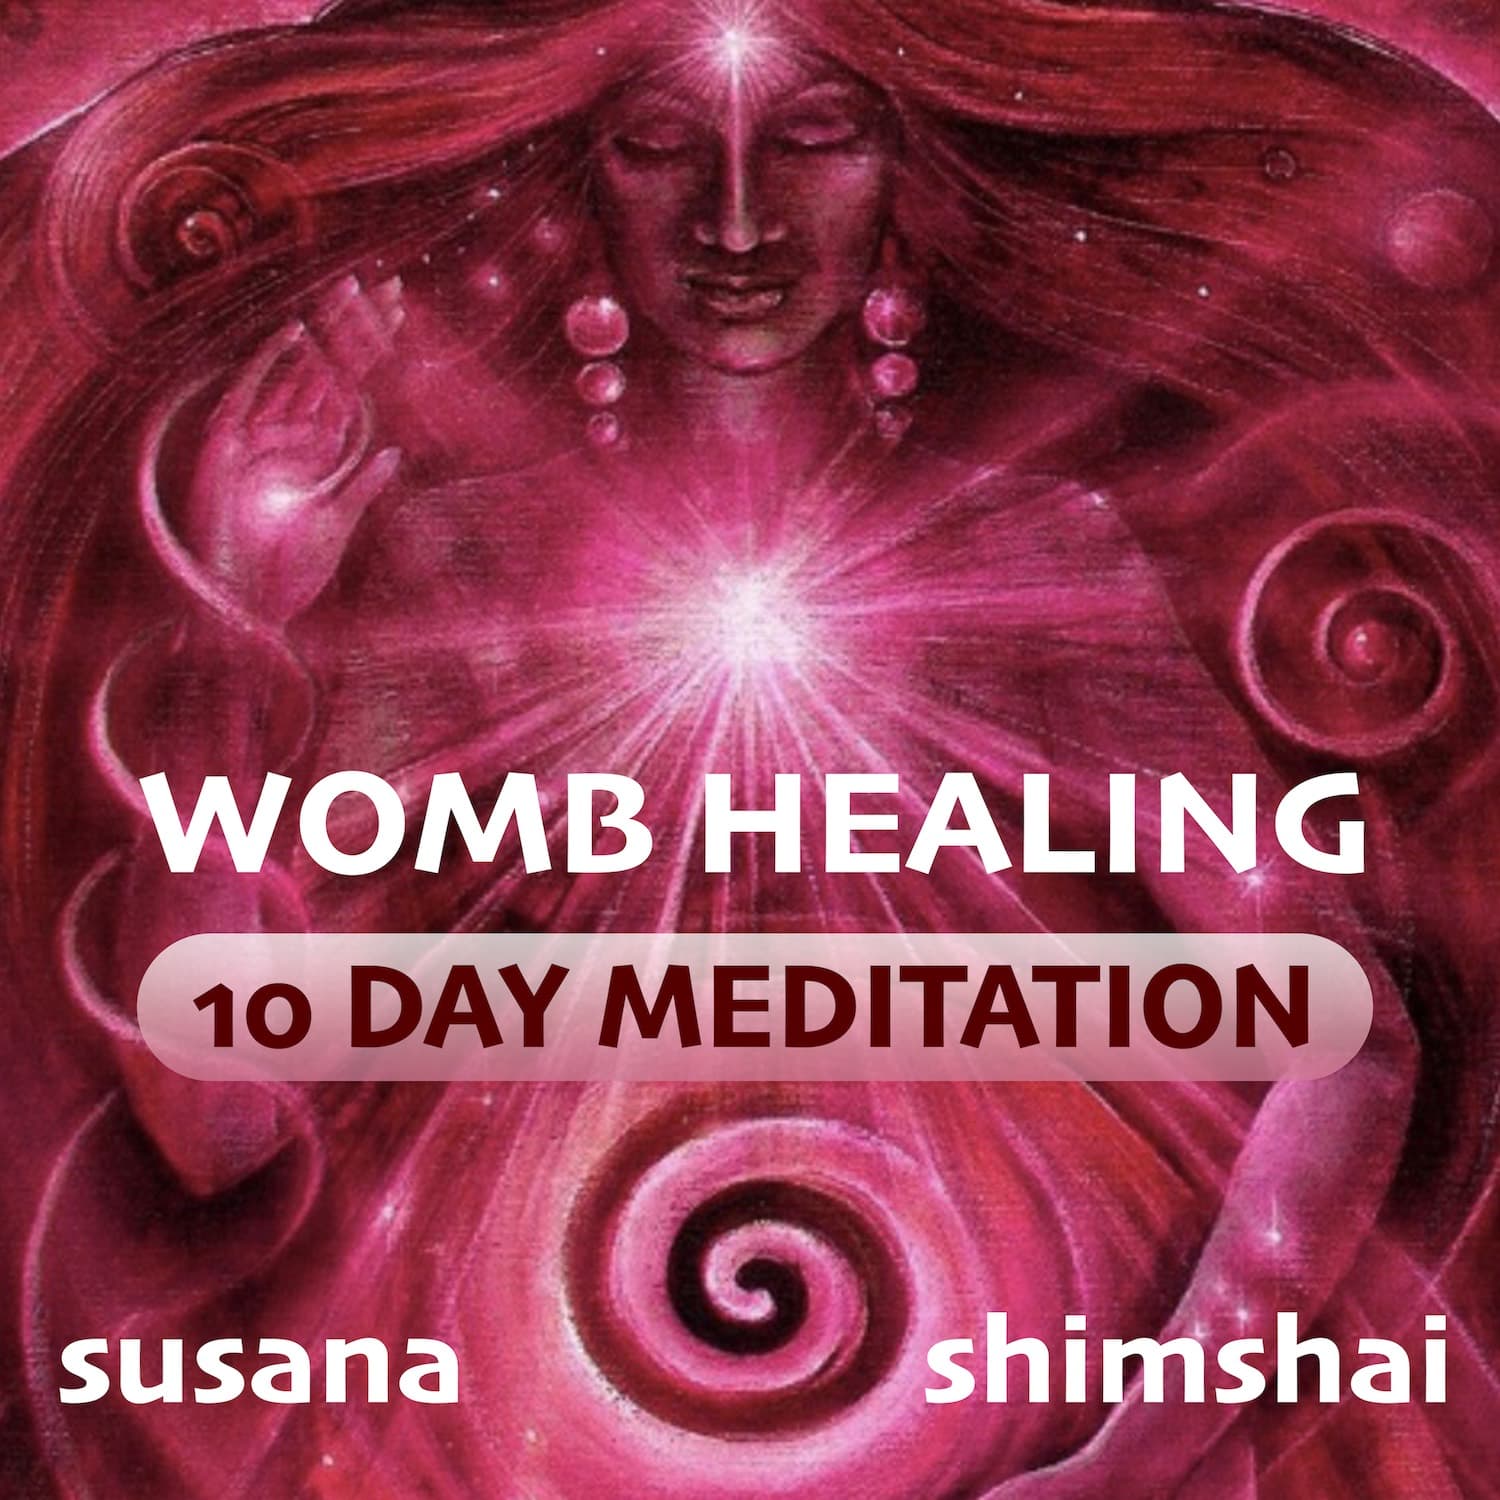 A 10 day meditation series to heal the sacred womb, guided by Susana and accompanied by music from Shimshai. 